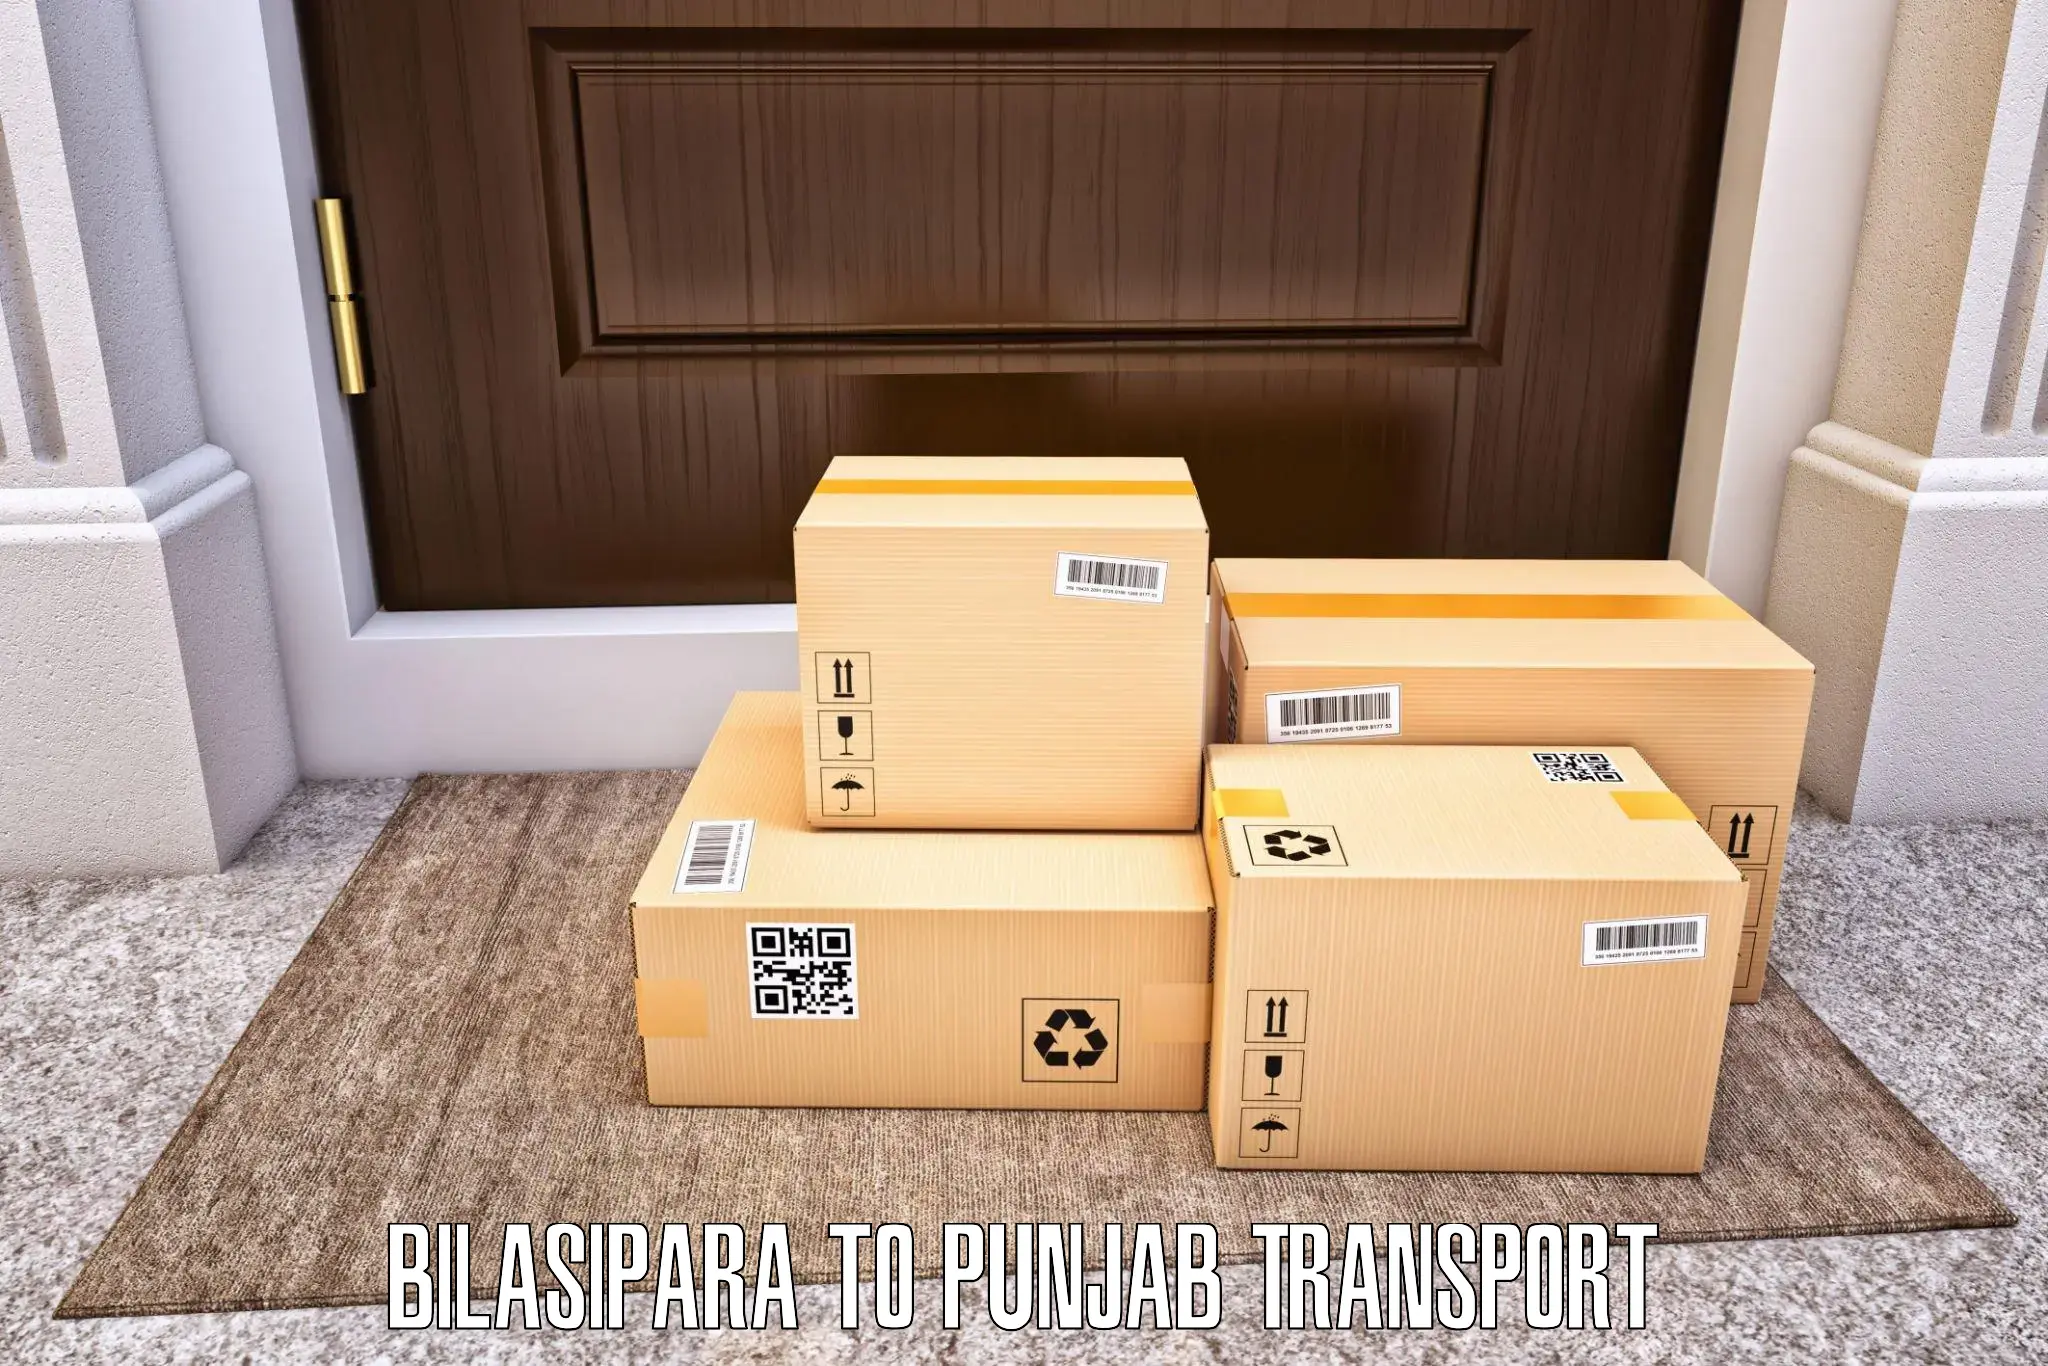 Scooty transport charges Bilasipara to Pathankot